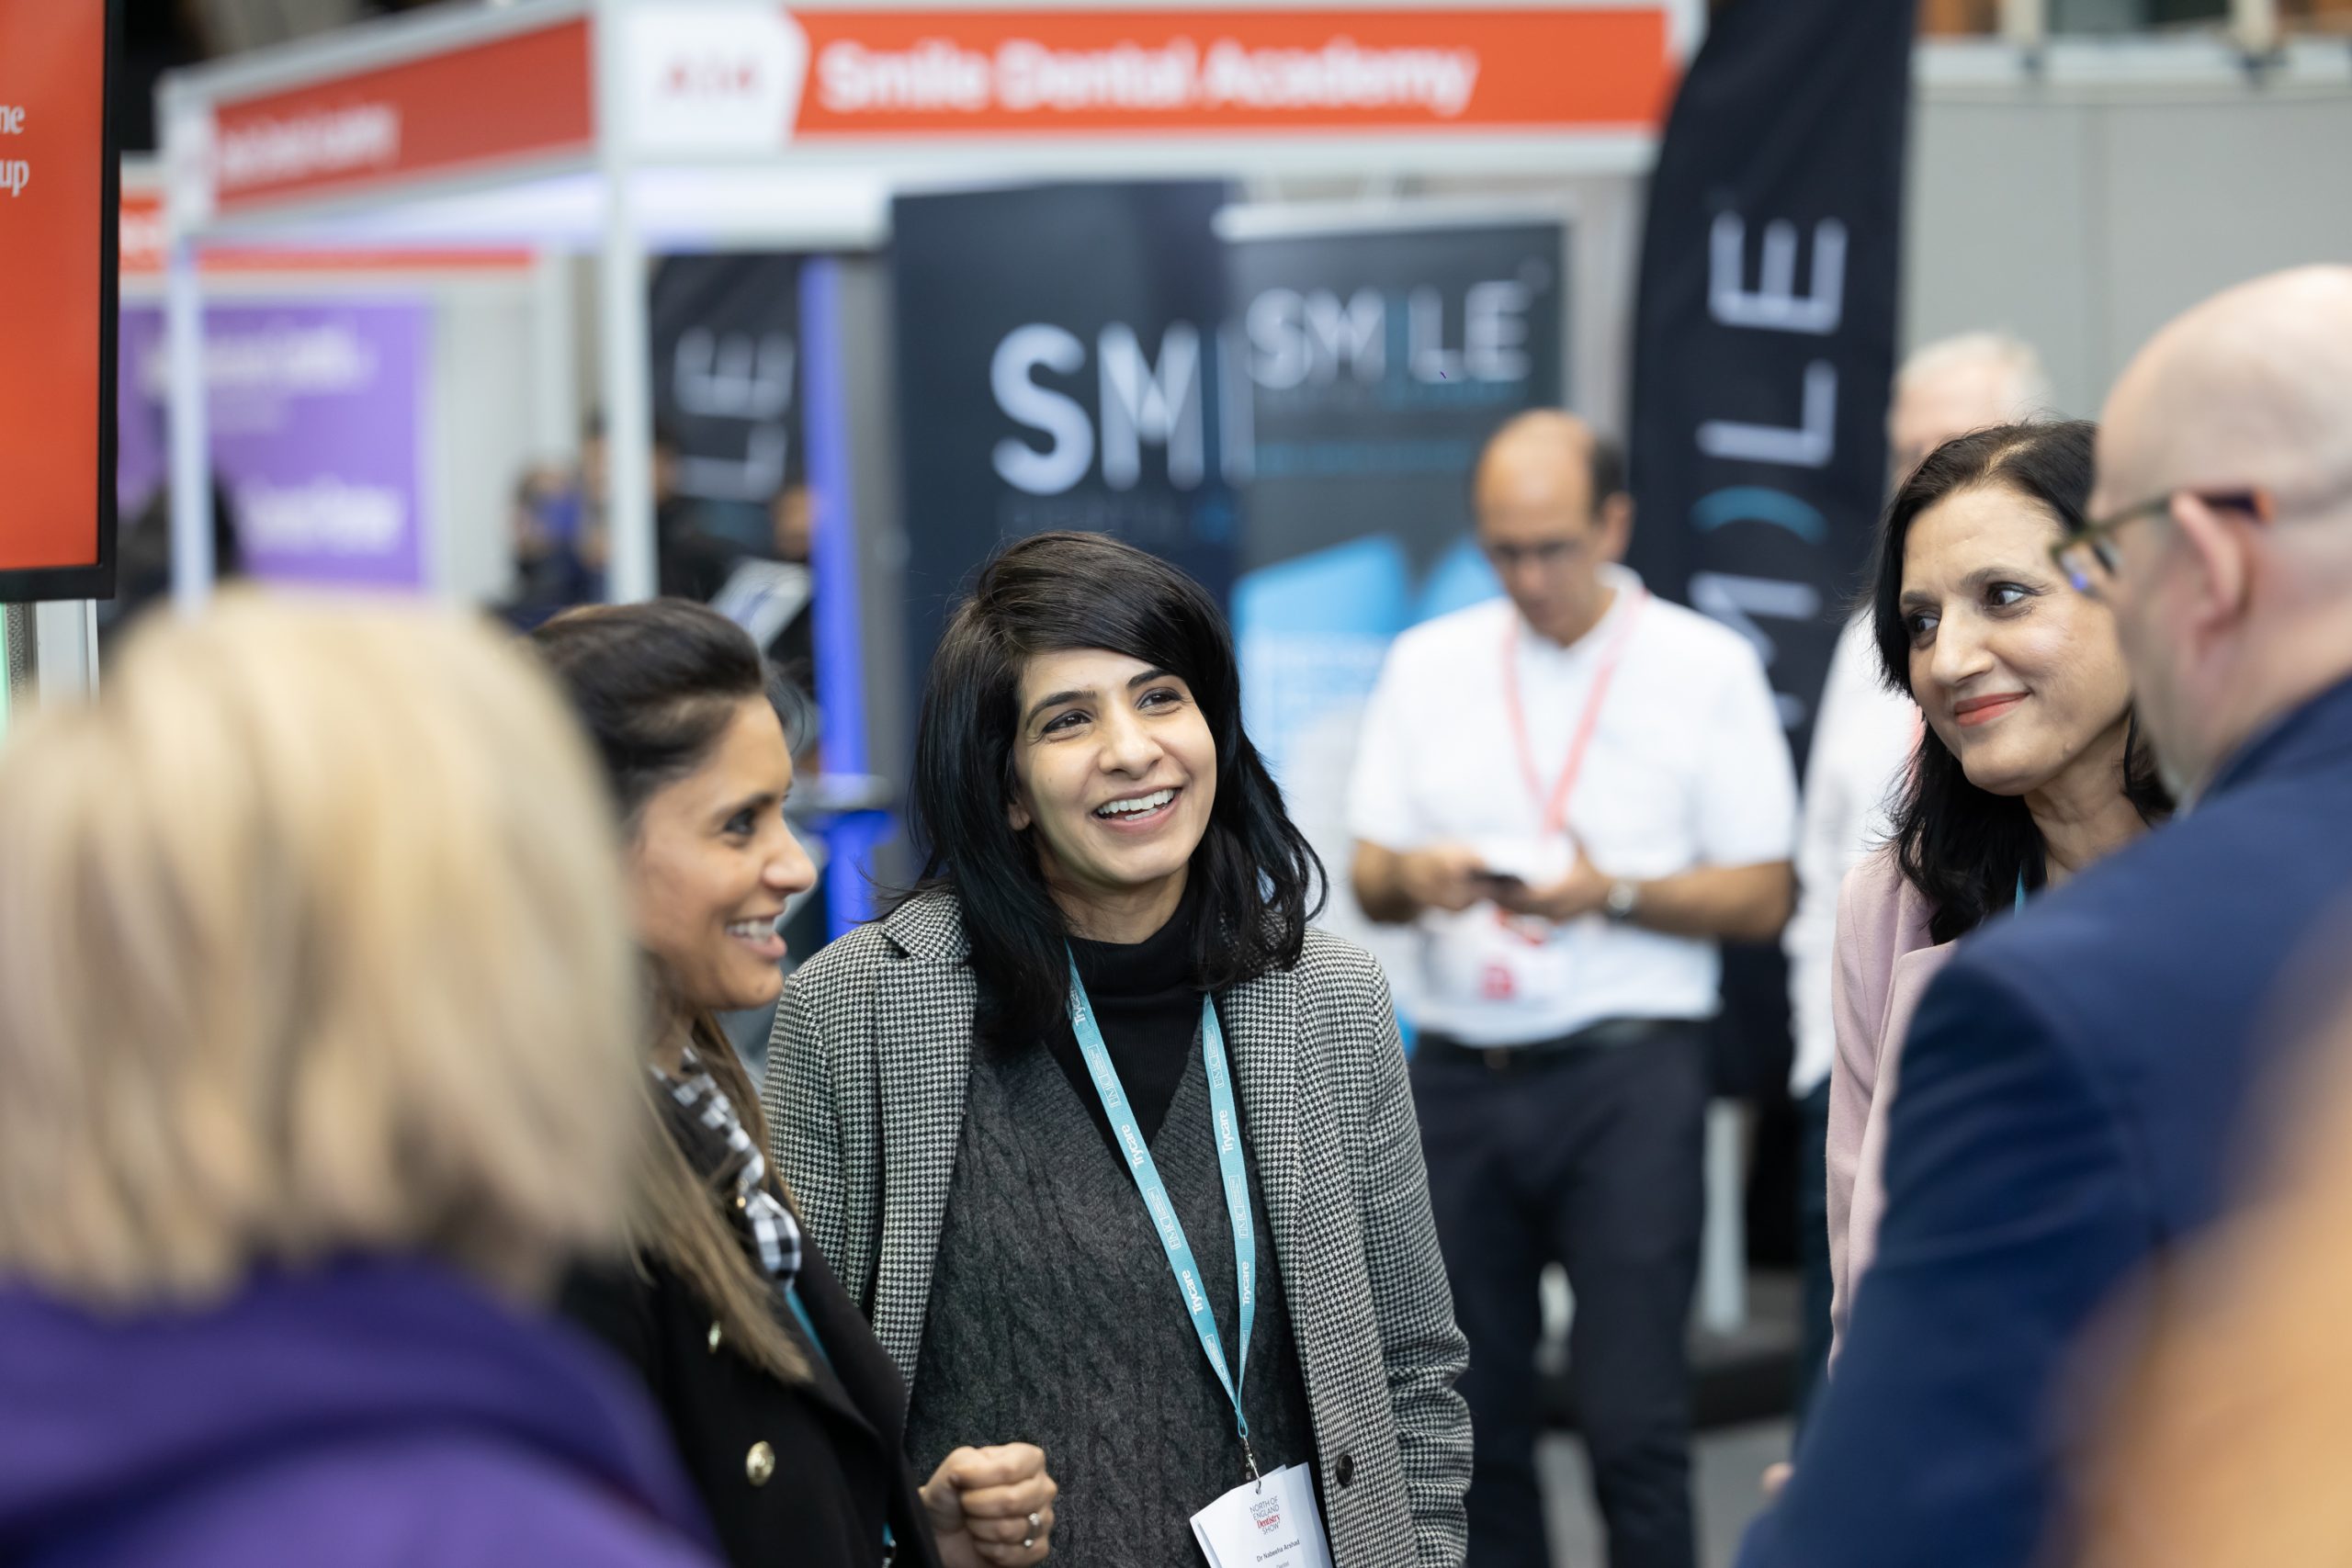 The North of England Dentistry Show: huge success! - Dentistry